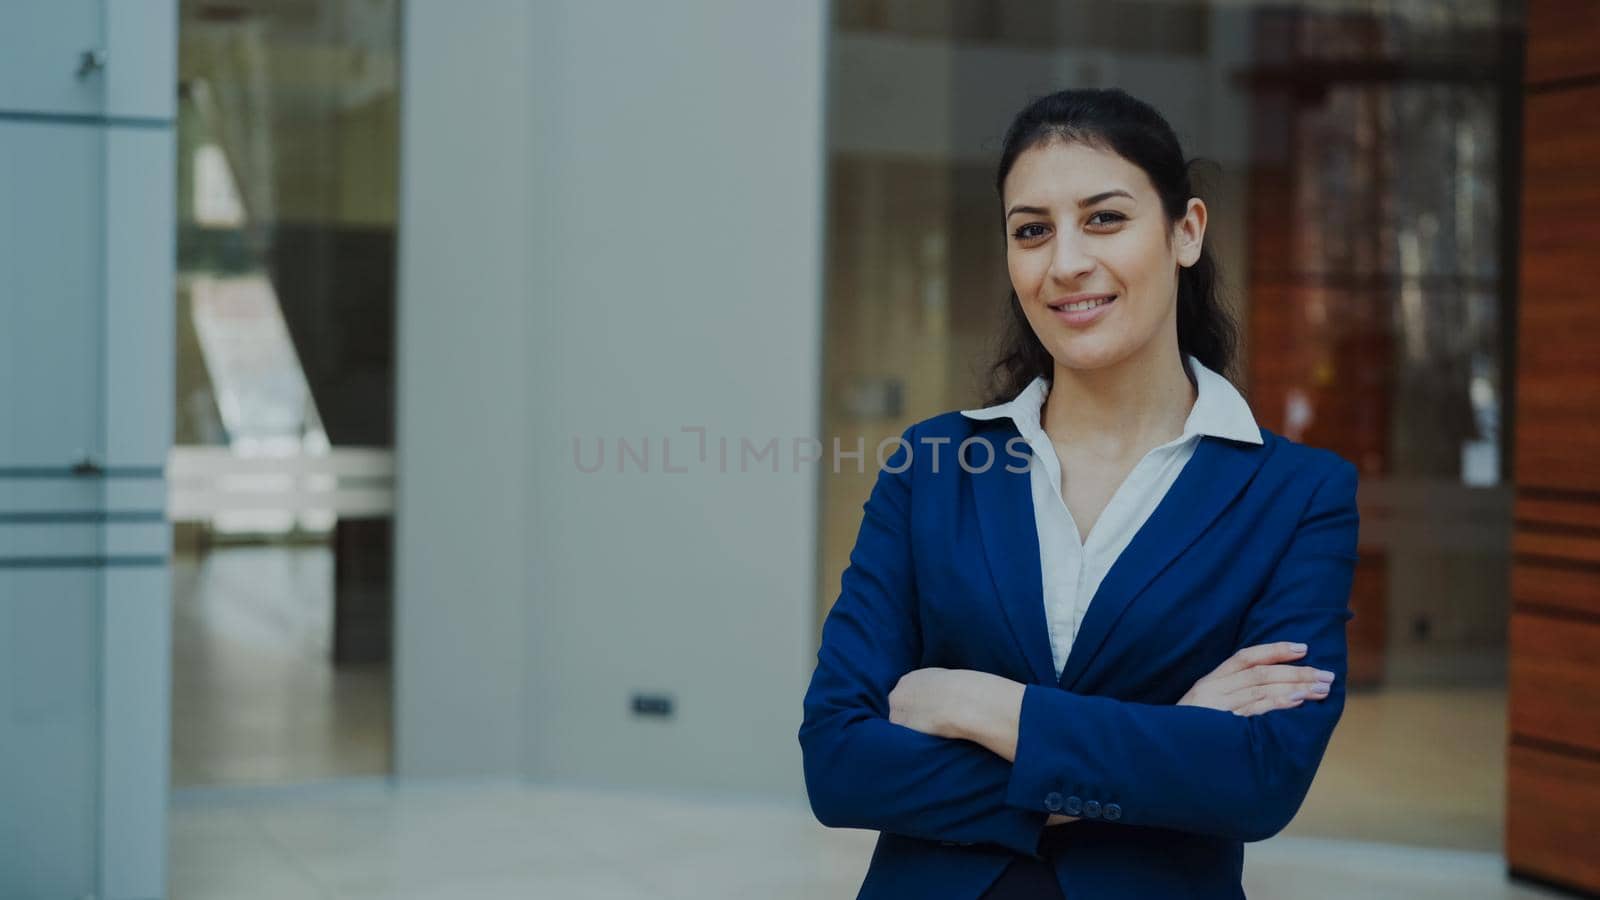 Portrait of successful businesswoman smiling and looking into camera in modern office indoors